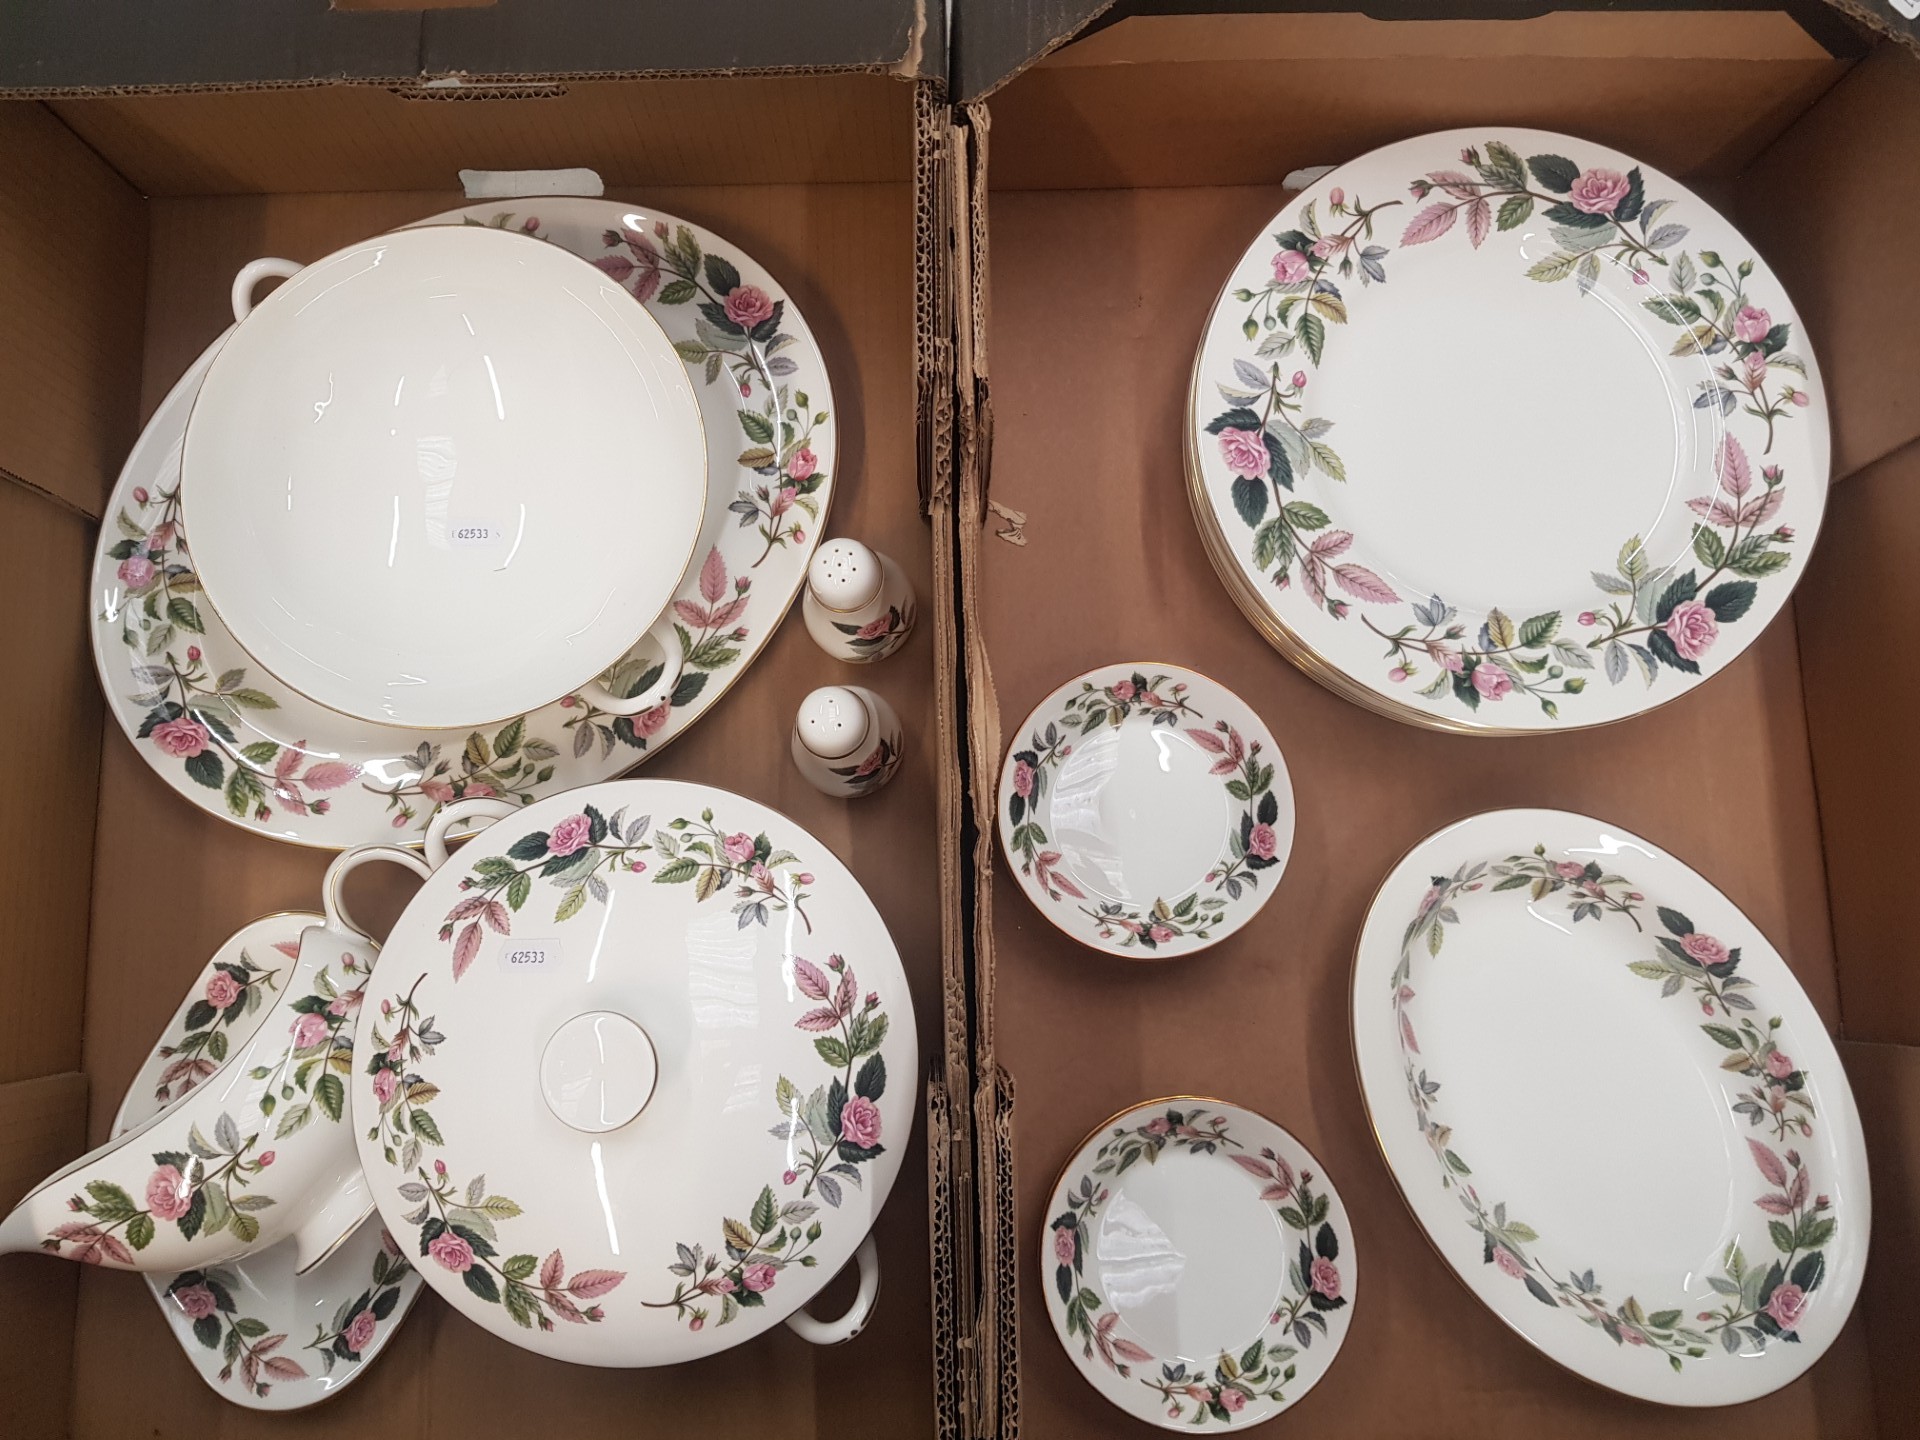 Wedgwood Hathaway Rose pattern dinnerware items to include 7 dinner plates, oval platter, gravy boat